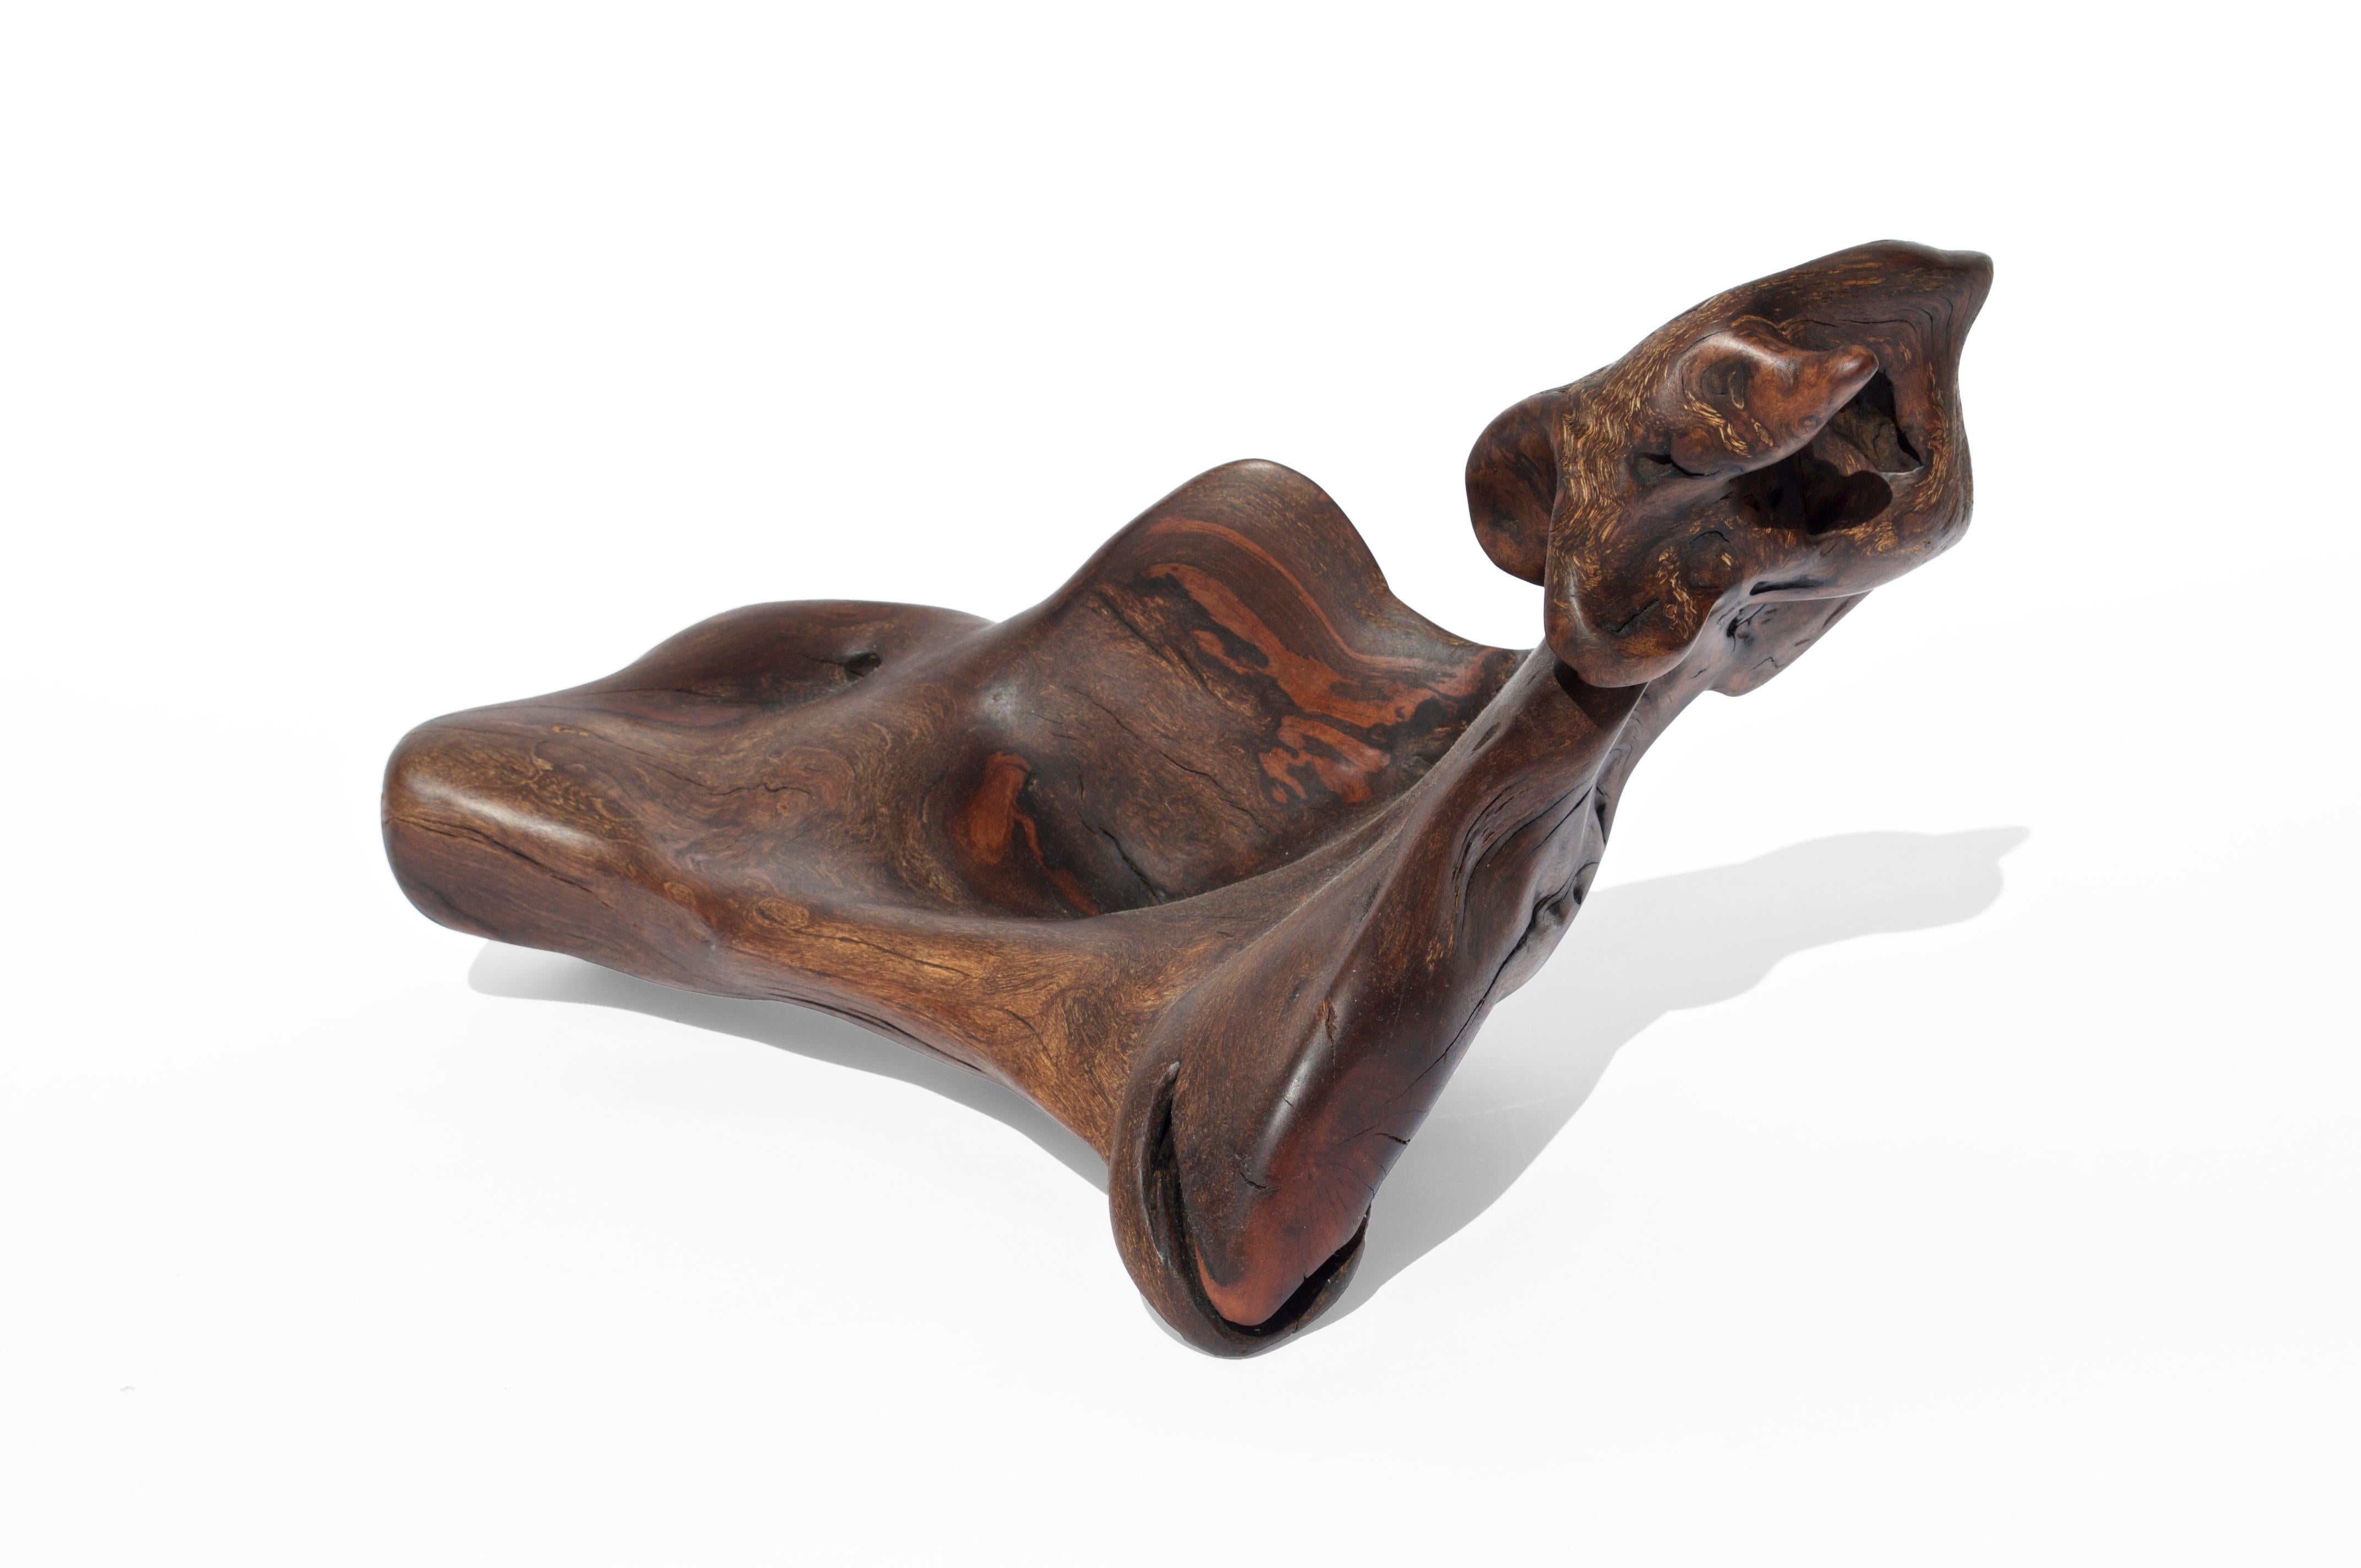 Vessel 2730 by Jörg Pietschmann
Dimensions: D 34 x W 47 x H 25.5 cm 
Materials: driftwood 
Finish: polished oil finish.


In Pietschmann’s sculptures, trees that for centuries were part of a landscape and founded in primordial forces tell stories